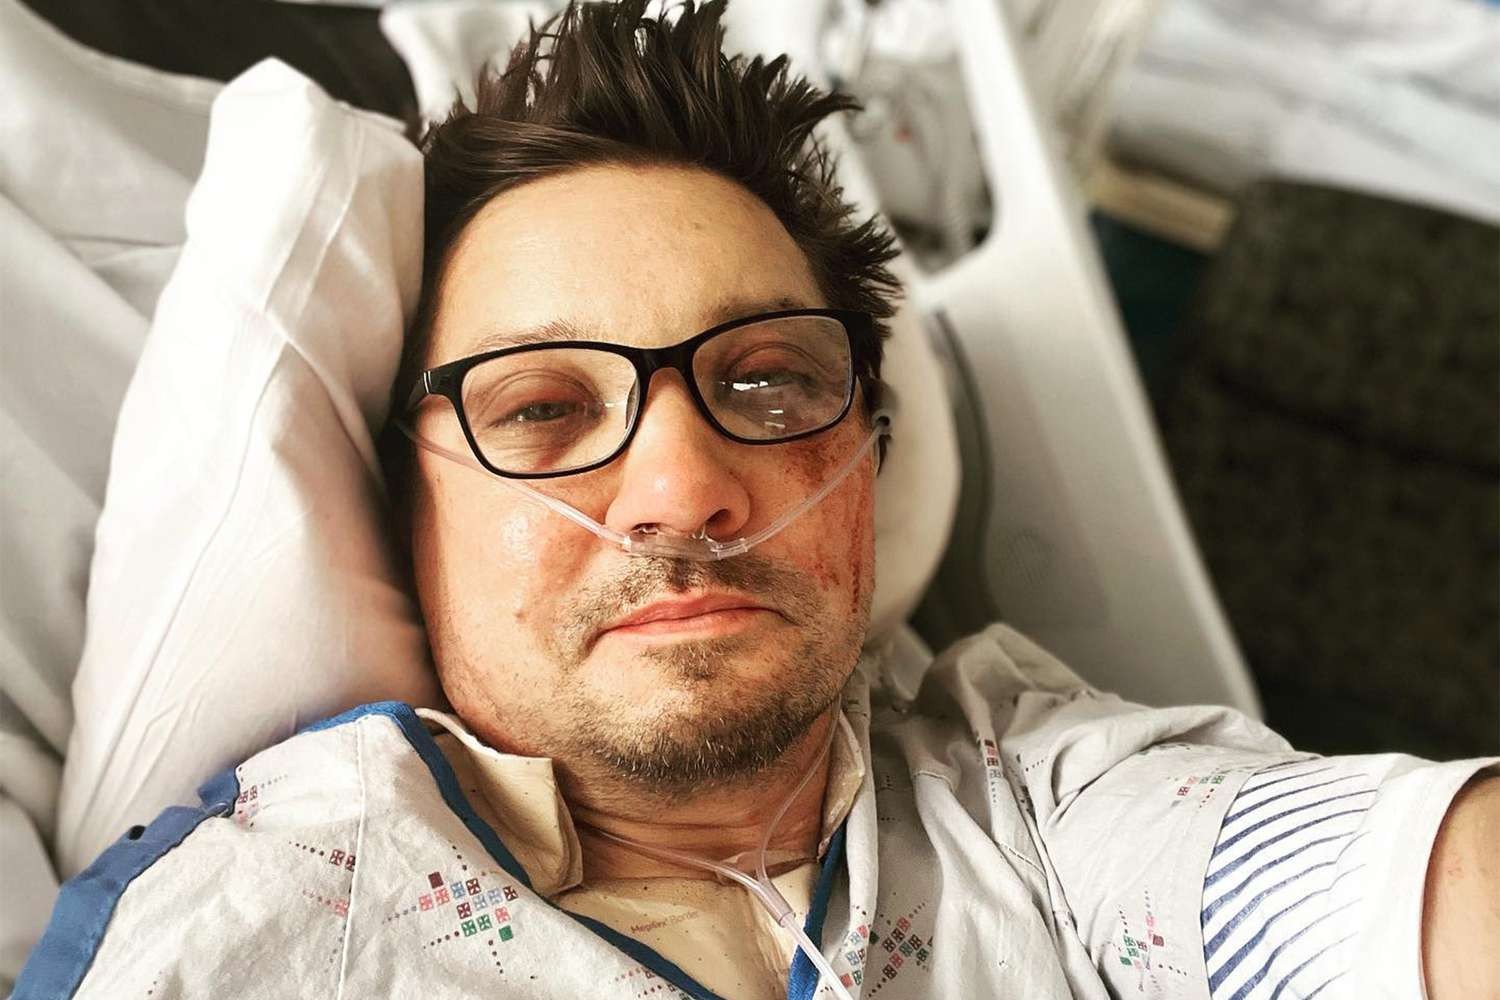 Jeremy Renner in the aftermath of his accident.